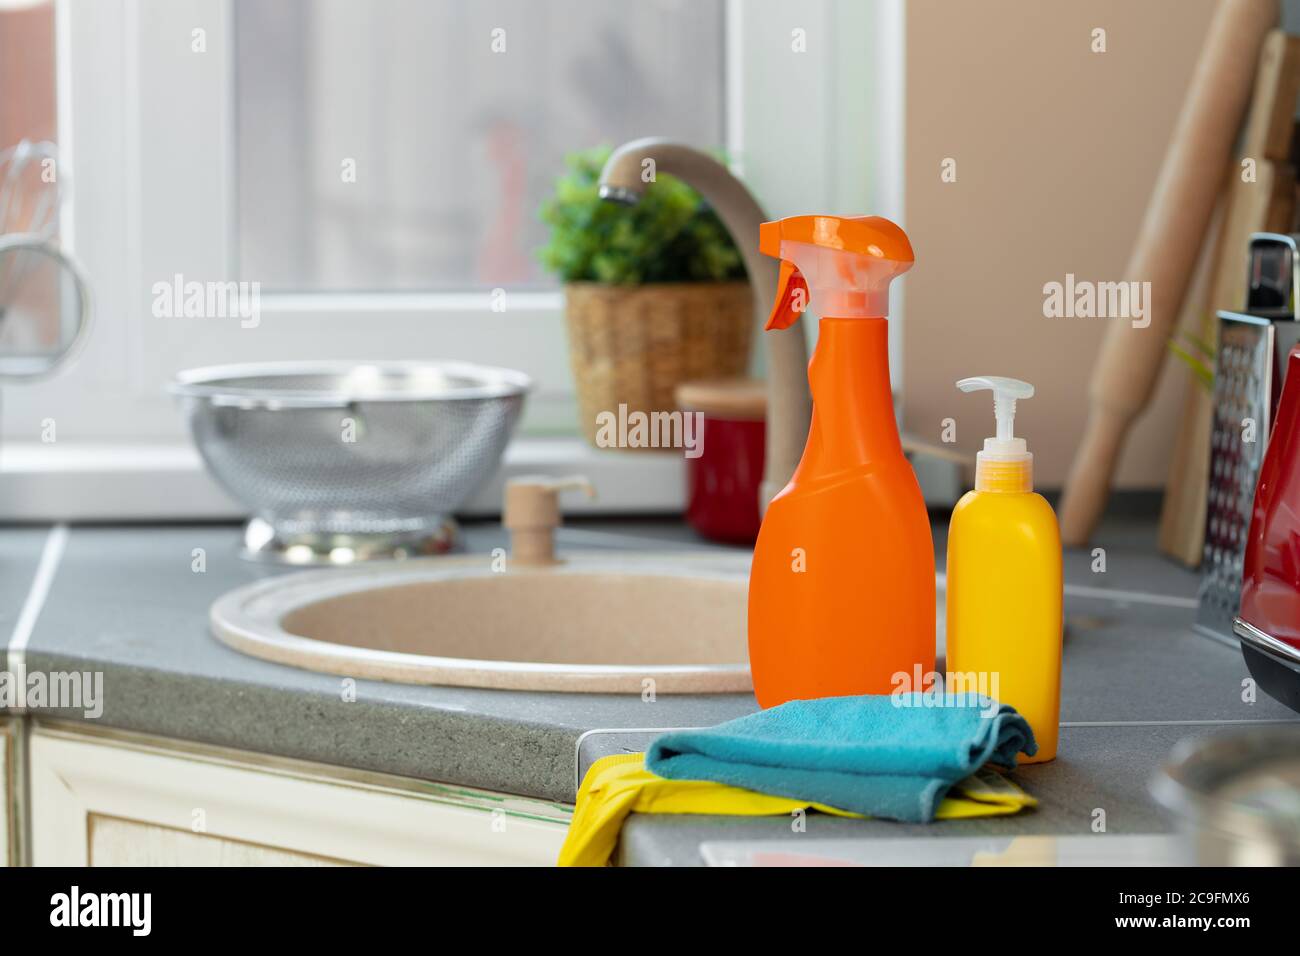 https://c8.alamy.com/comp/2C9FMX6/household-chemicals-product-bottles-standing-near-the-kitchen-sink-2C9FMX6.jpg